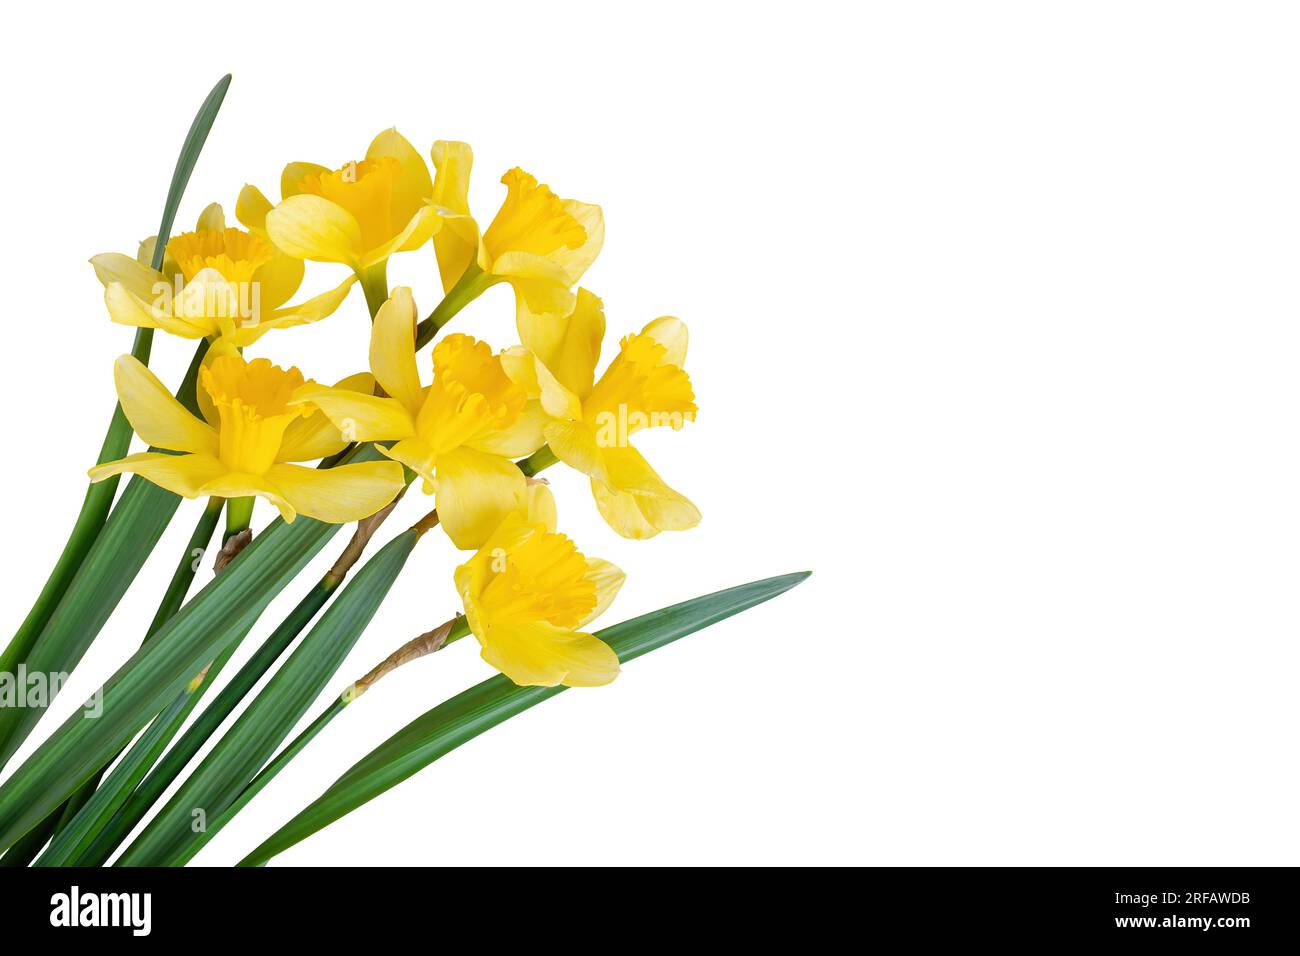 Beautiful bouquet of yellow daffodils or narcissus isolated on white background. Blooming spring flowers, Easter bells. Spring greeting card, invitati Stock Photo